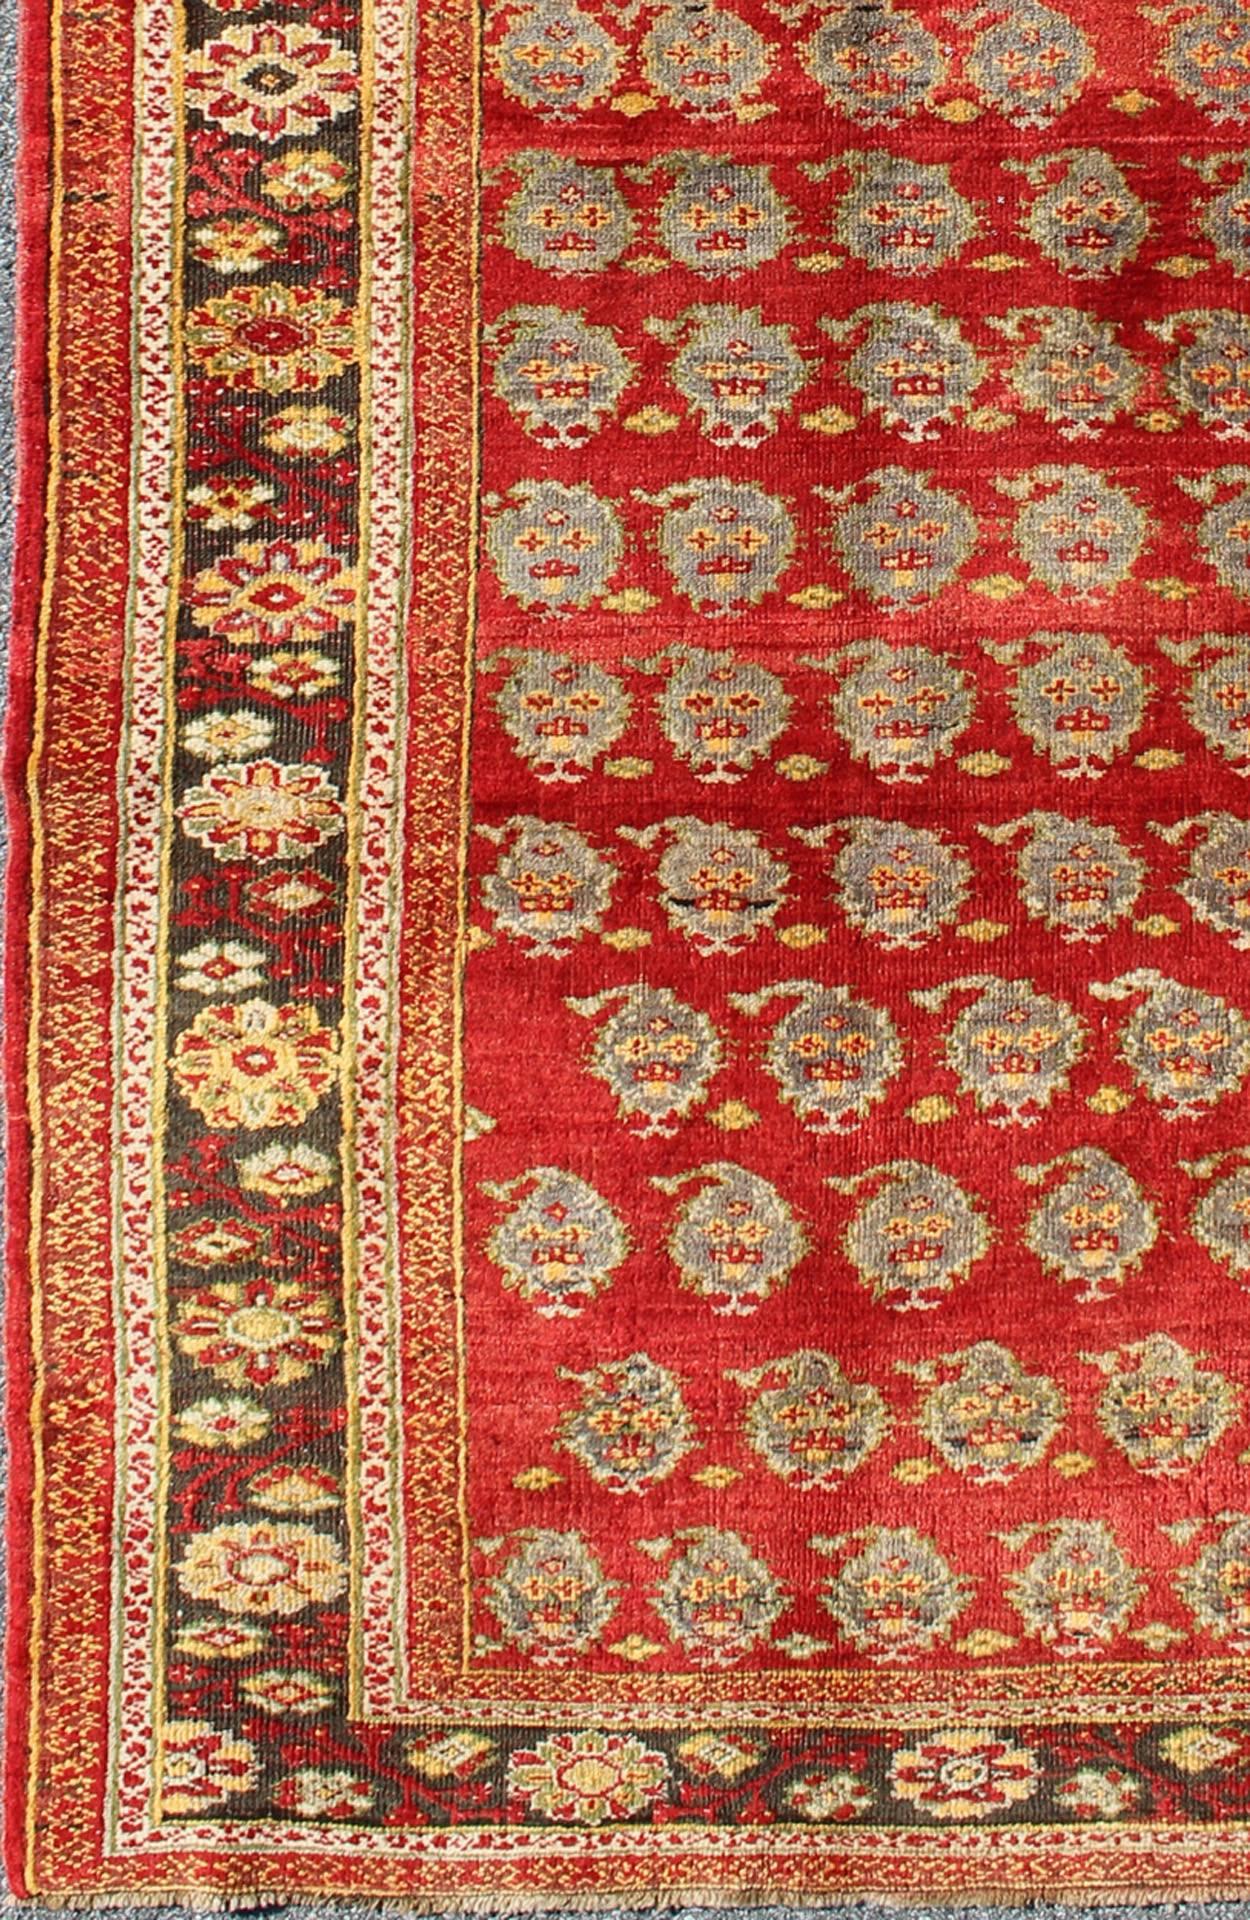 Vintage Turkish Oushak Carpet with All-Over Paisley Design and Central Red Field, Rug/ osm-23.  
This unique Turkish Oushak carpet features an all-over design of intricate paisley shapes set atop a central field of bright red. The entire piece is